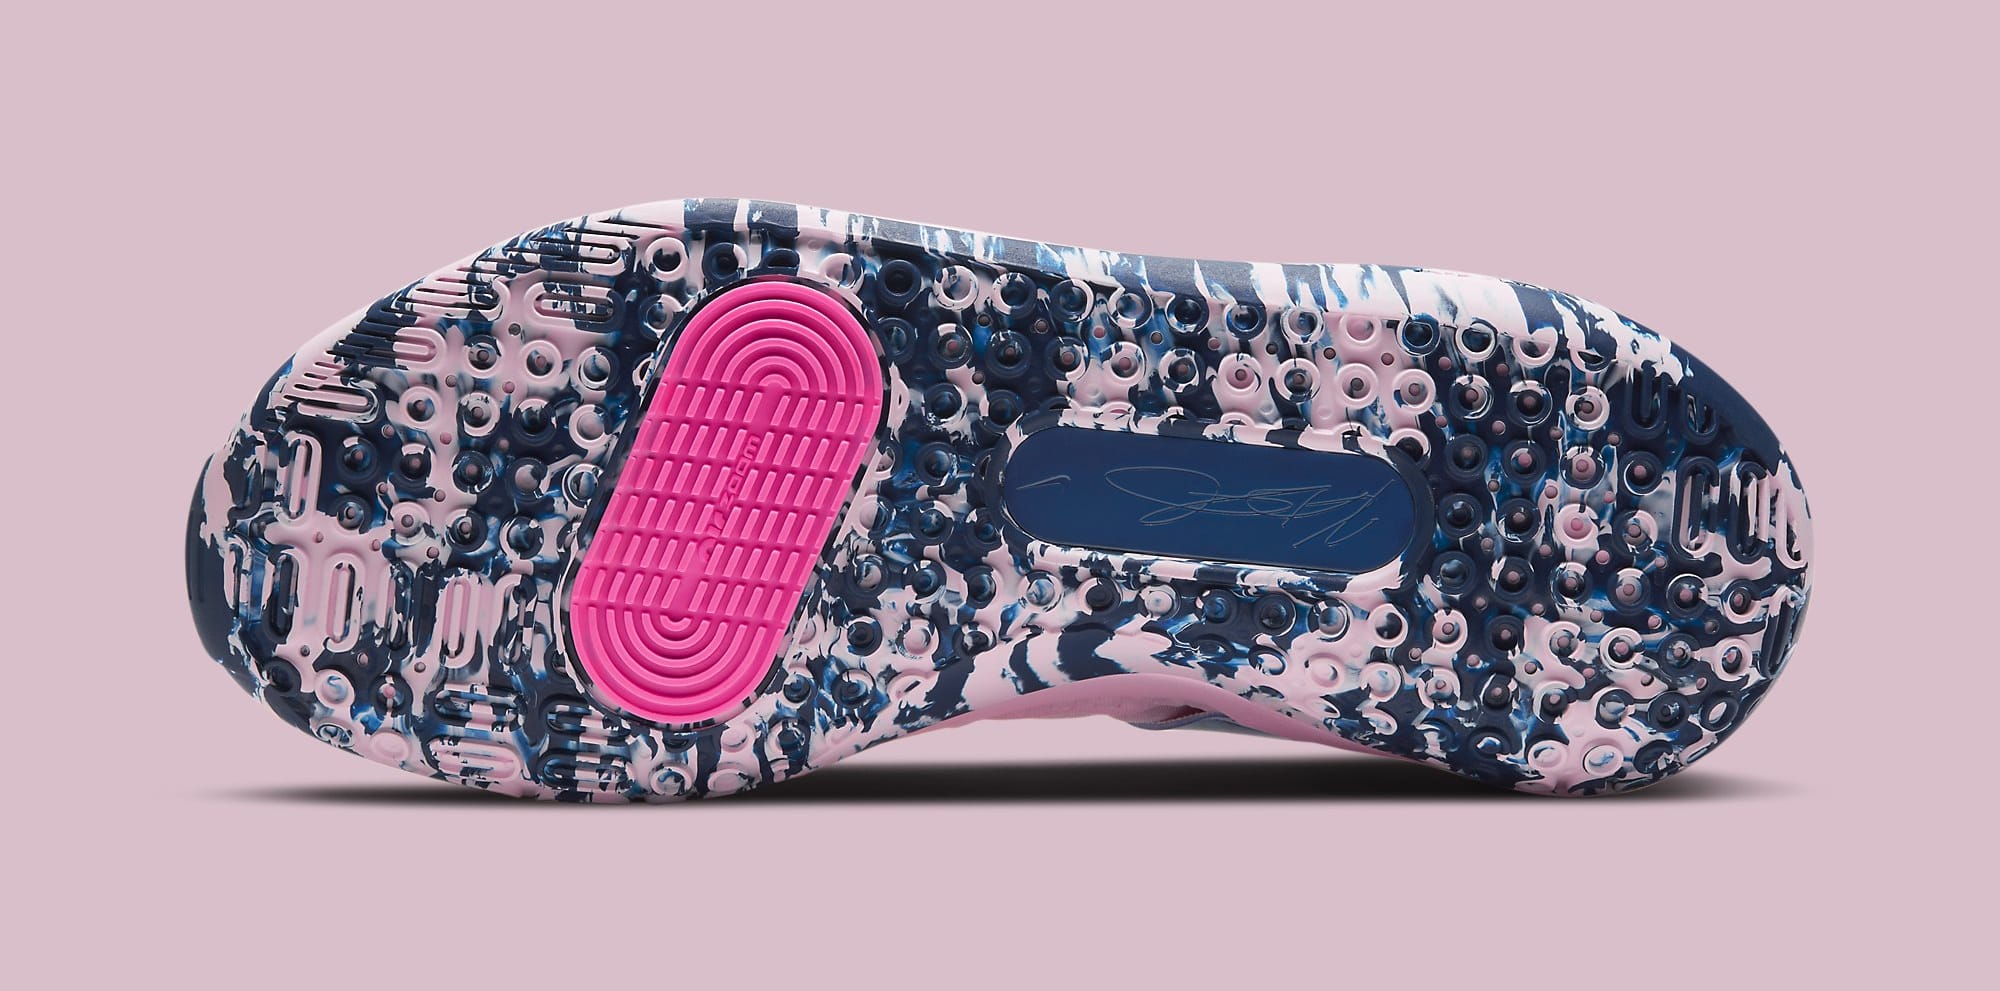 Nike KD 13 &#x27;Aunt Pearl&#x27; DC0011-600 Outsole